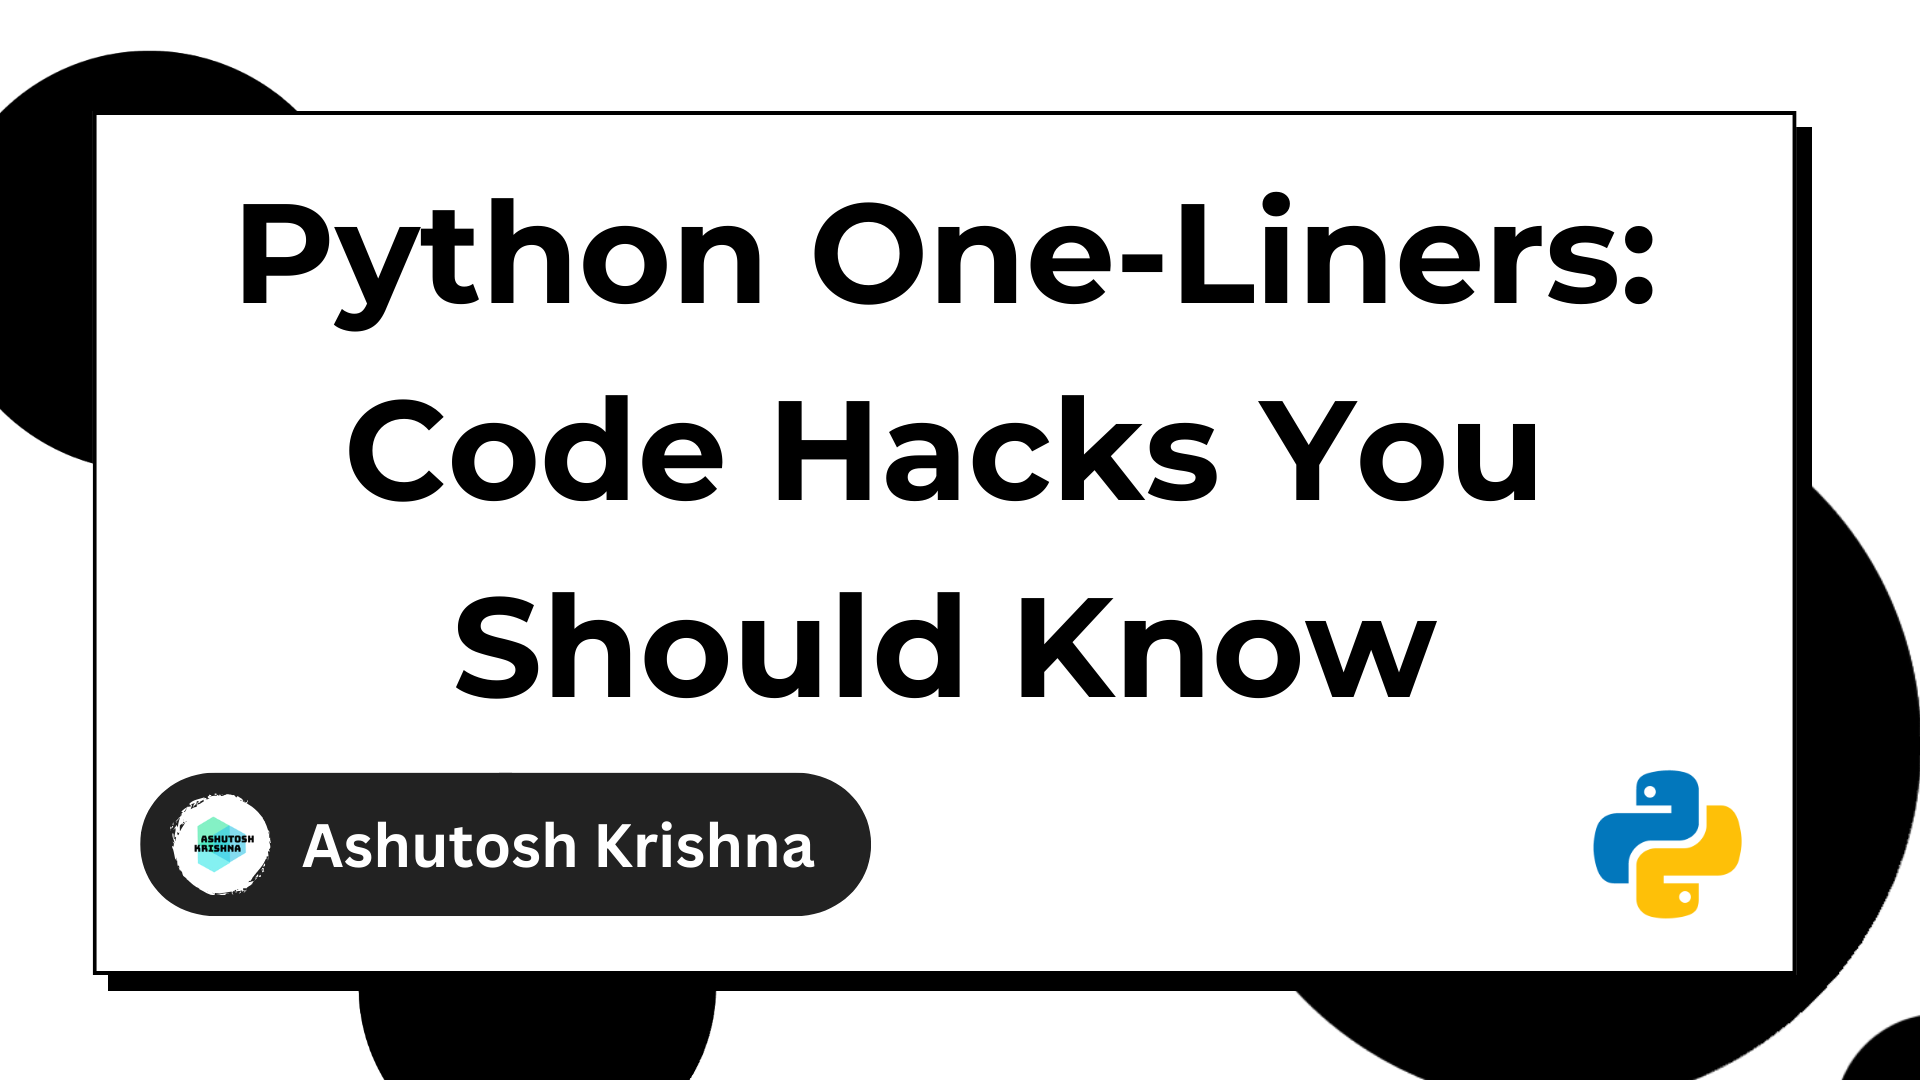 Python One-Liners - Code Hacks You Should Know